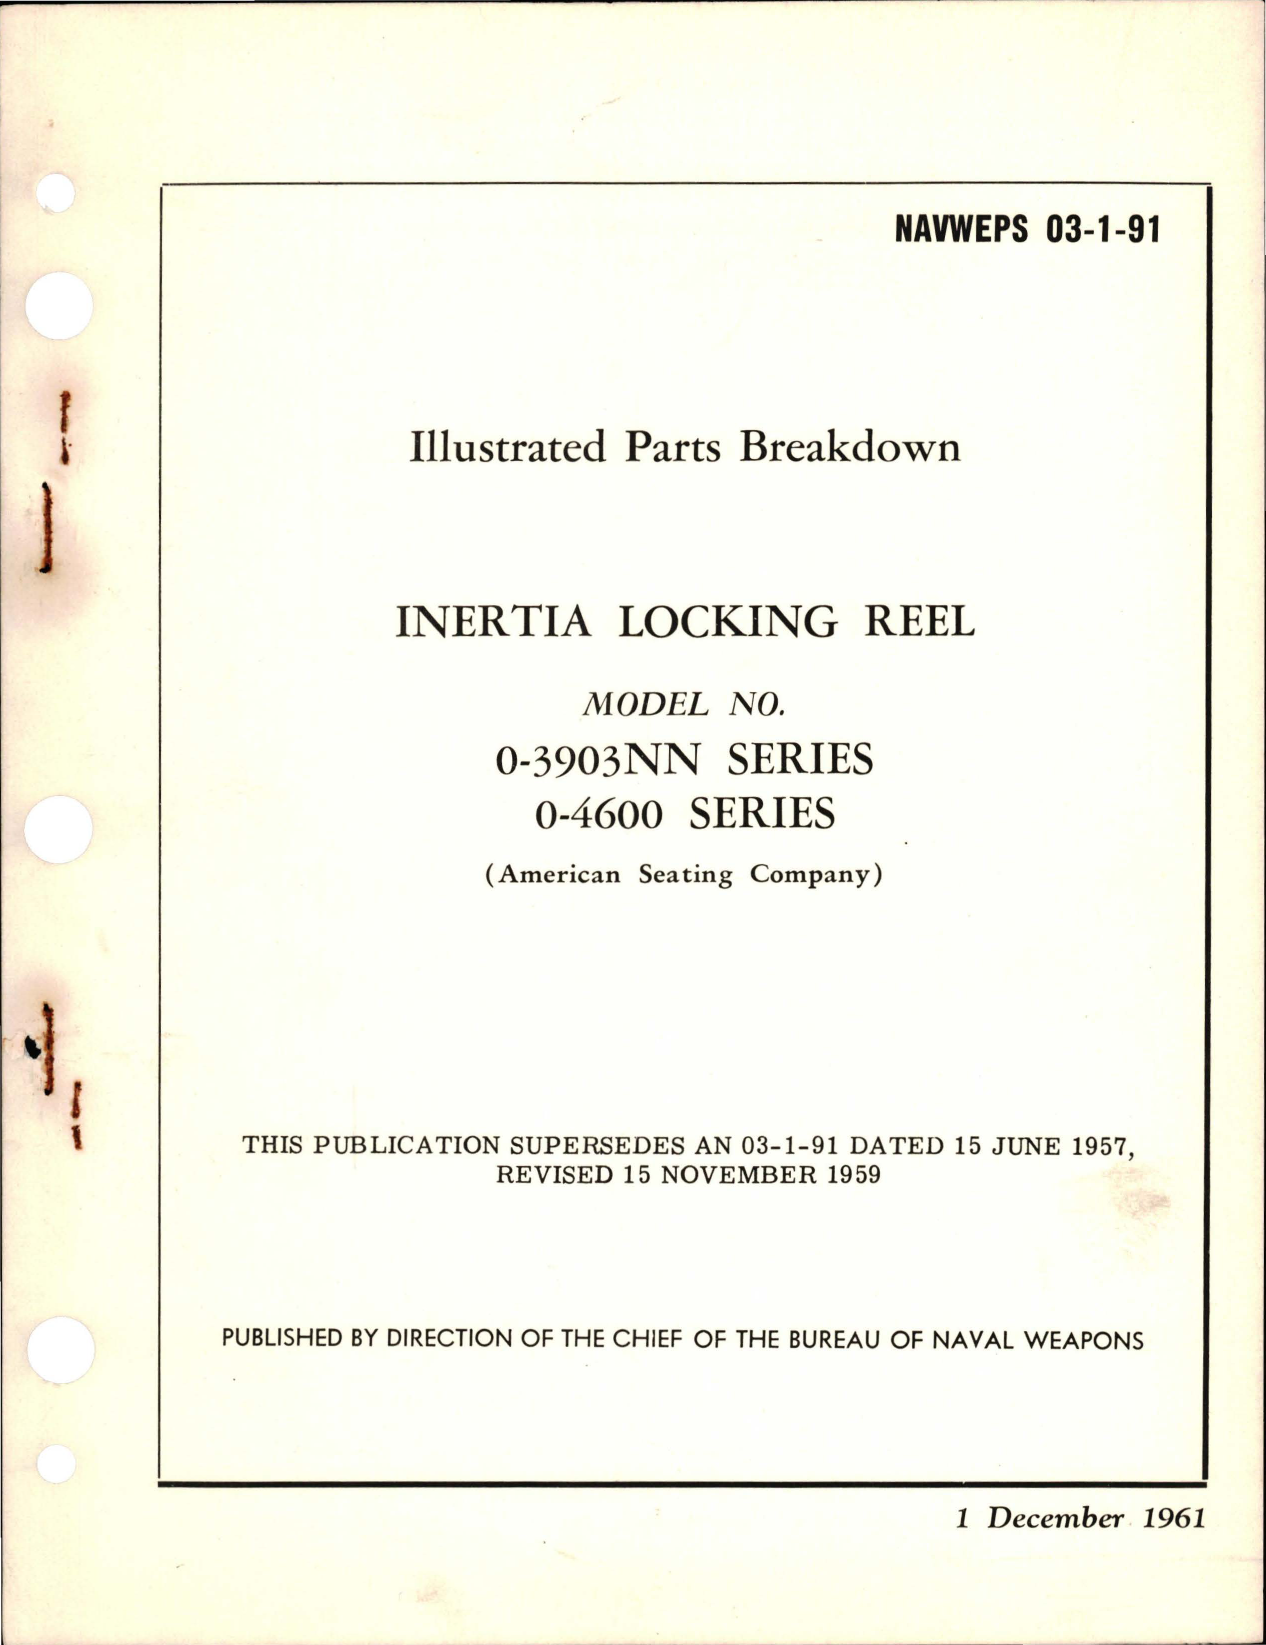 Sample page 1 from AirCorps Library document: Illustrated Parts Breakdown for Inertia Locking Reel - Models 0-3903NN and 0-4600 Series